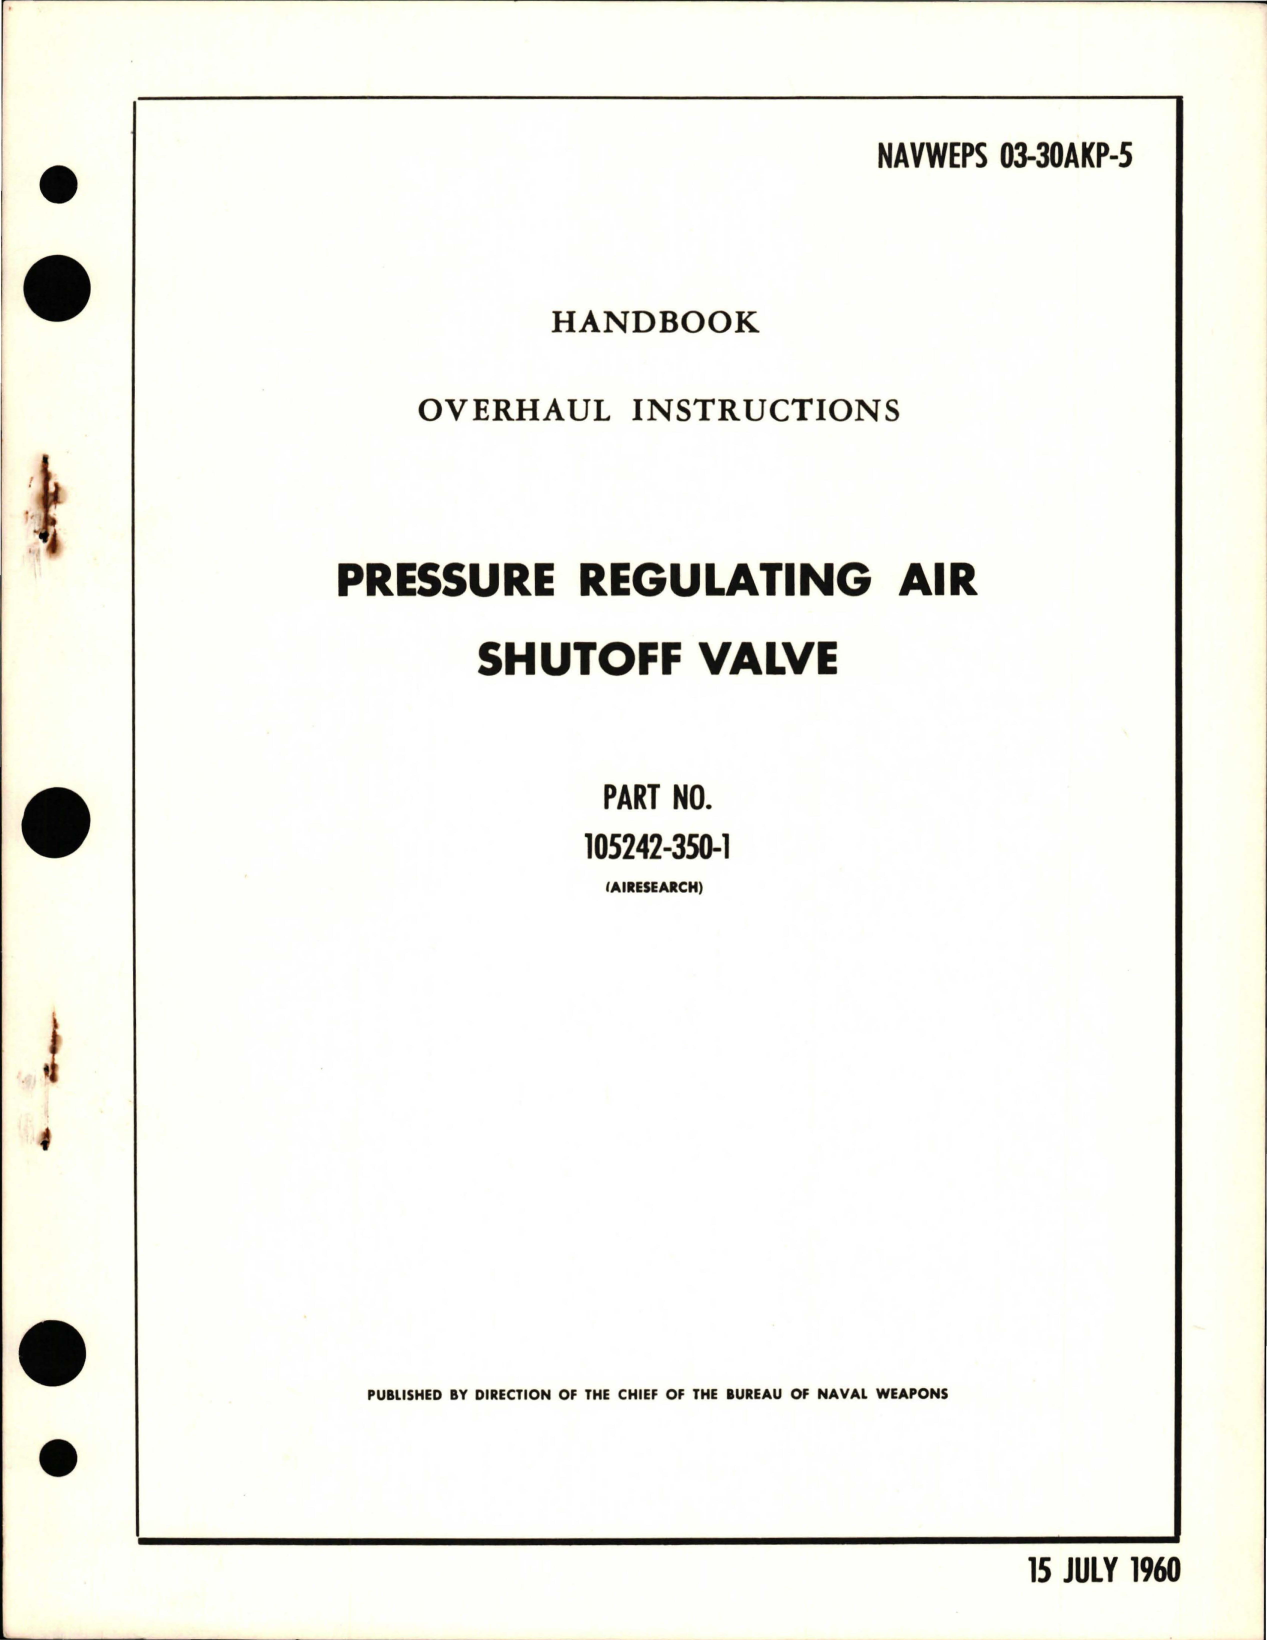 Sample page 1 from AirCorps Library document: Overhaul Instructions for Pressure Regulating Air Shutoff Valve - Part 105242-350-1